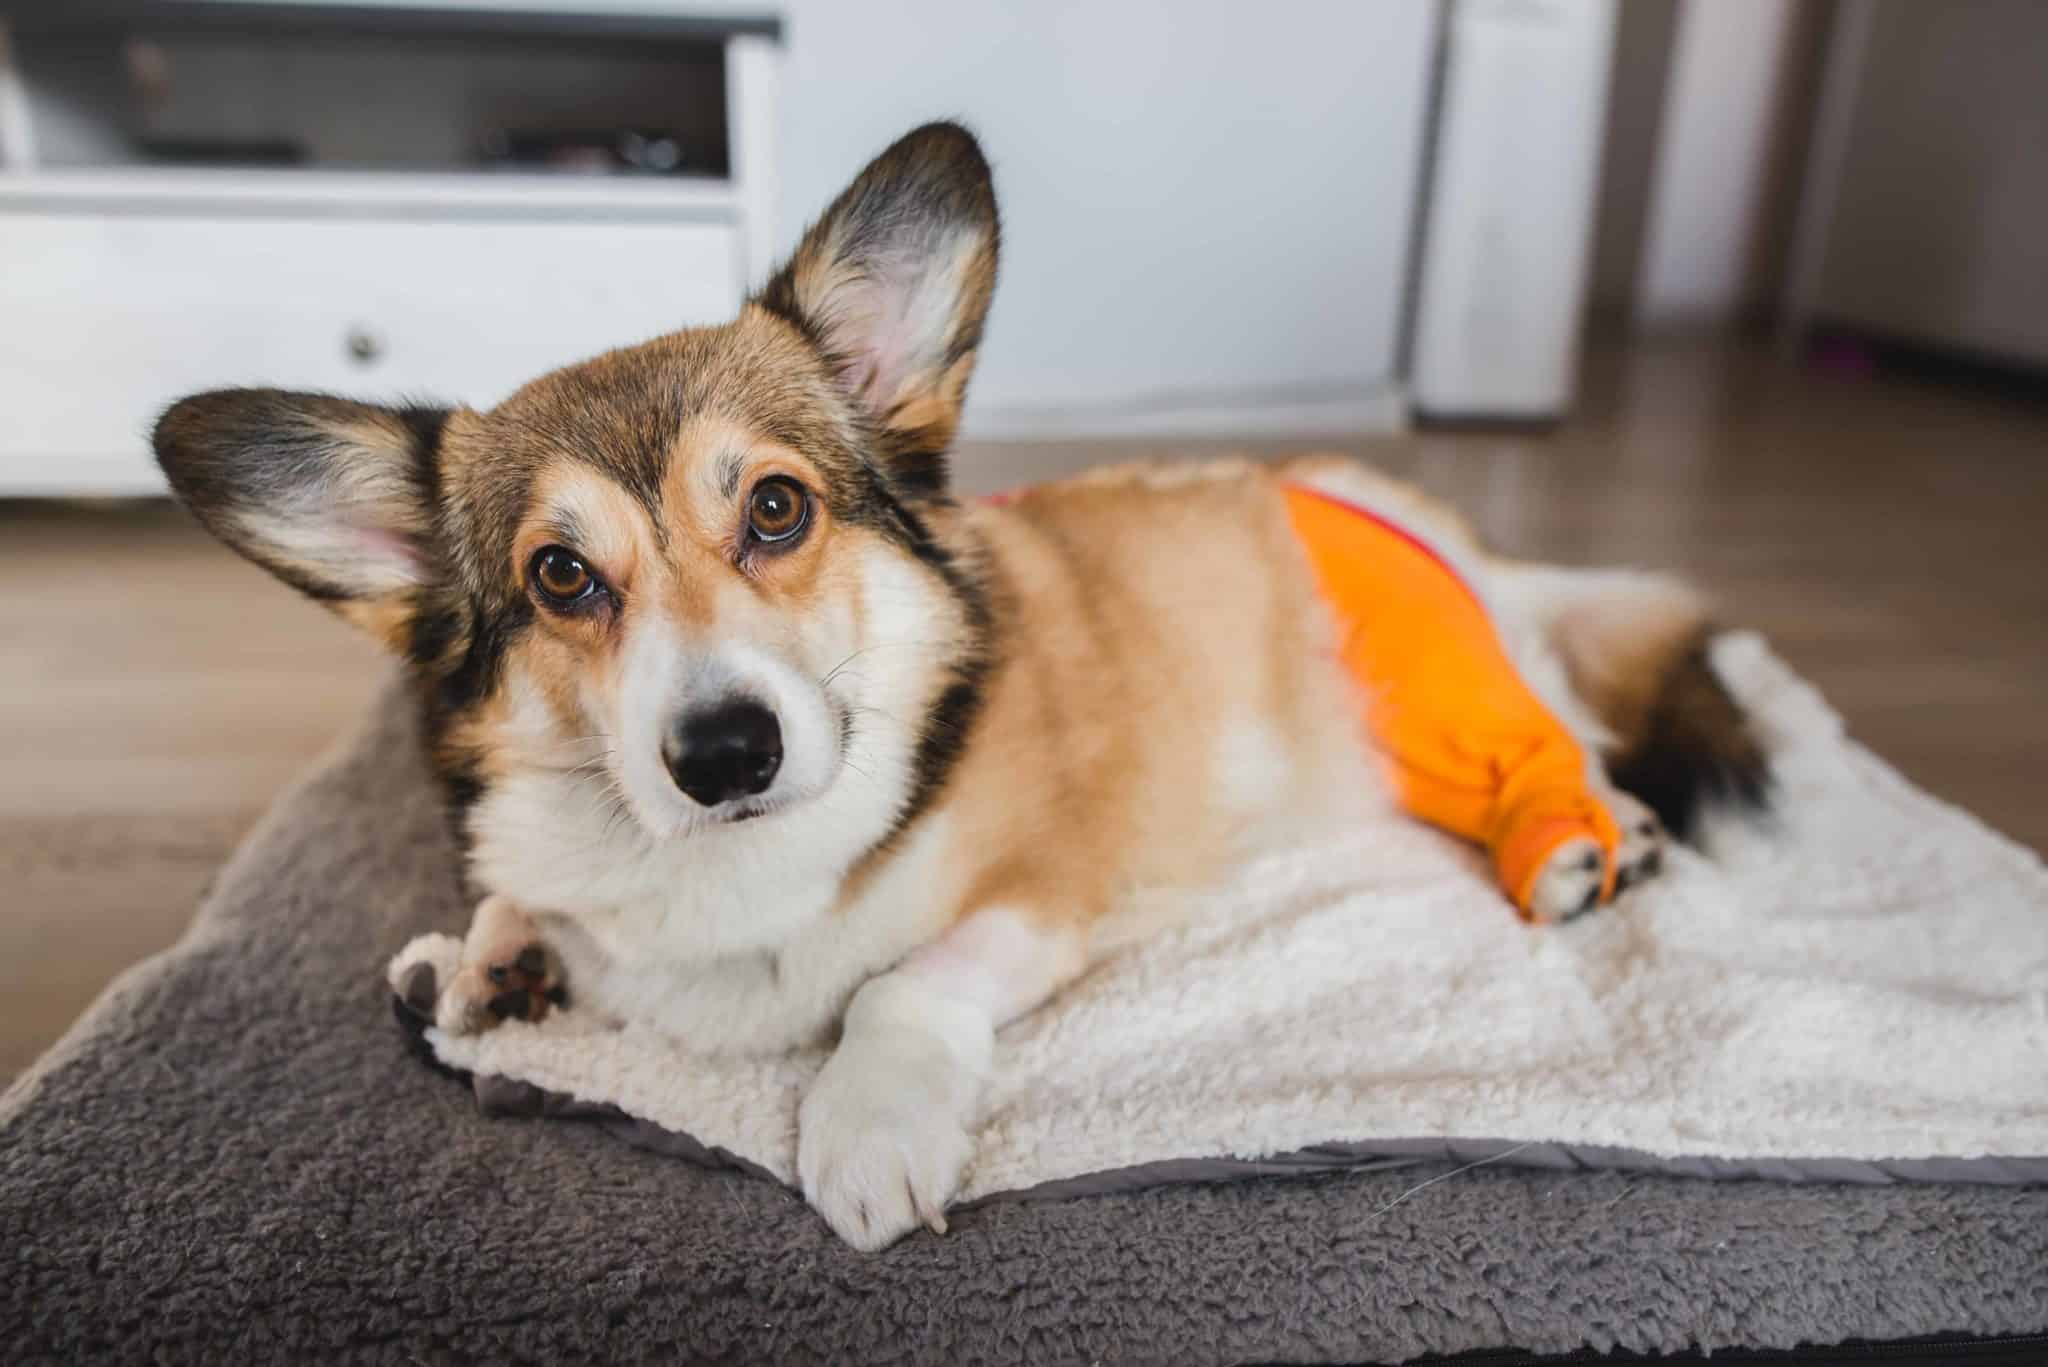 TPLO surgery treats canine ACL tears, a common knee injury